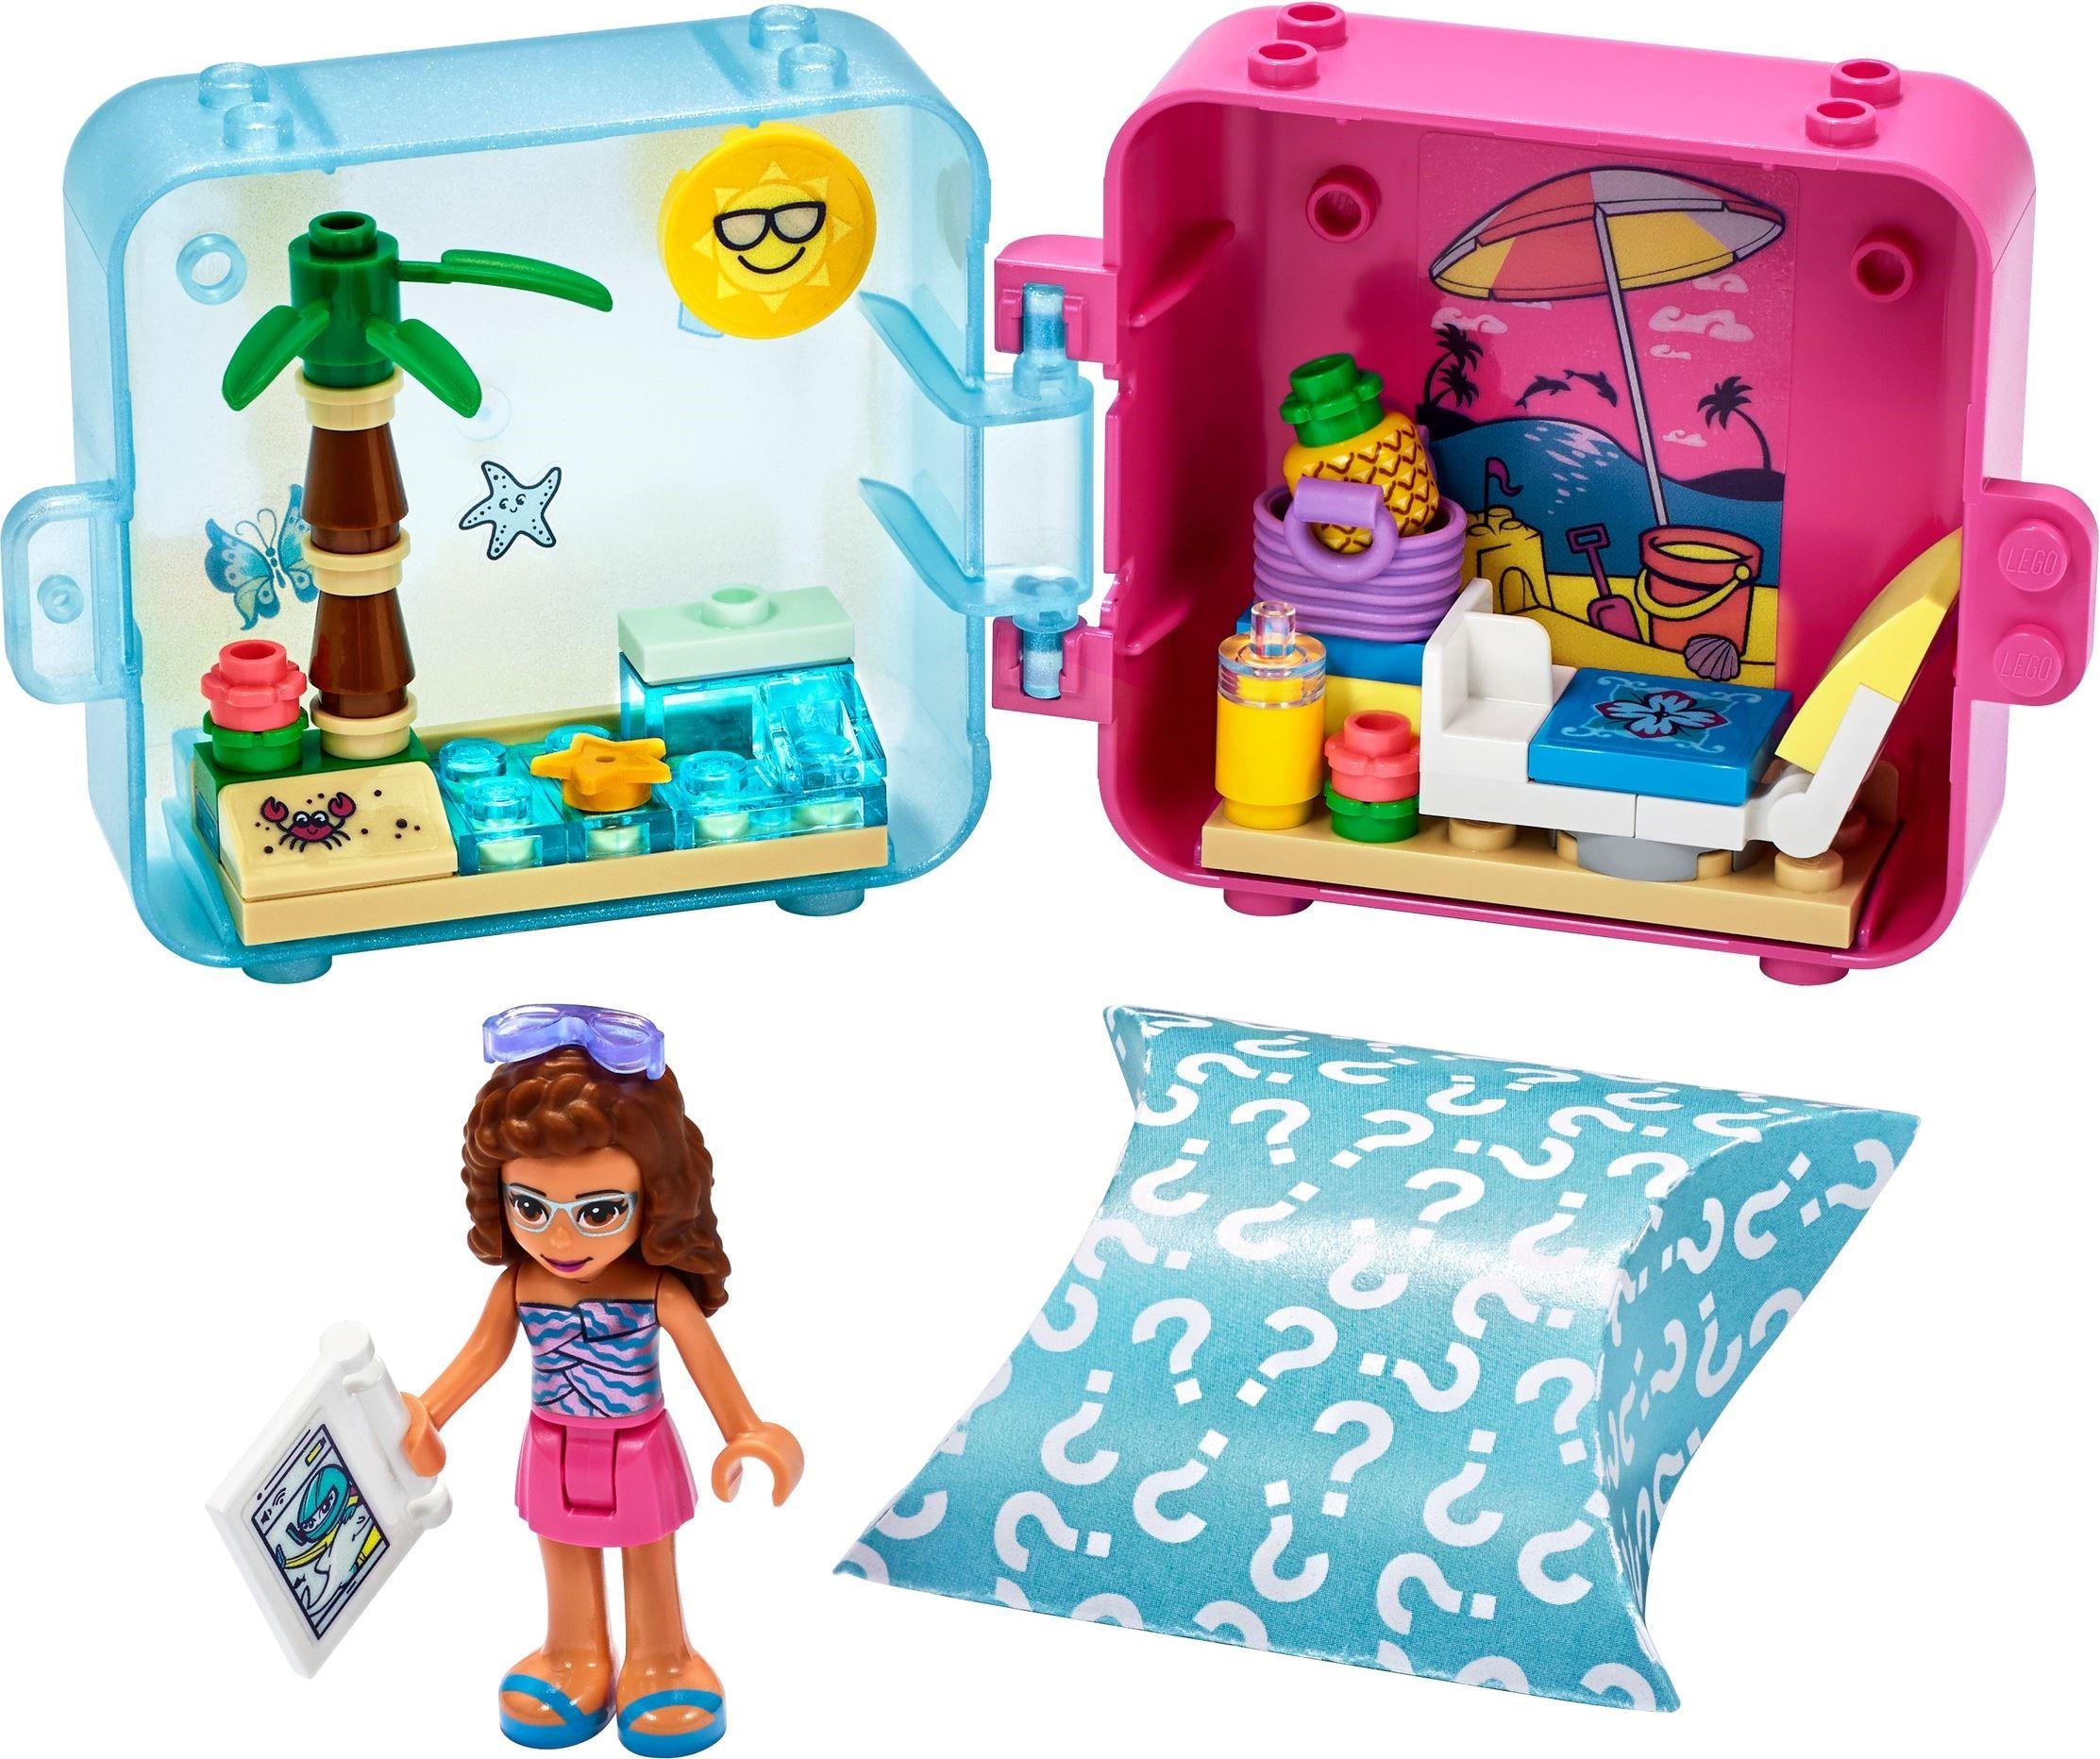 Lego Friends 41412 Olivia's Summer Play Cube Set Series 3 Brand New Sealed 